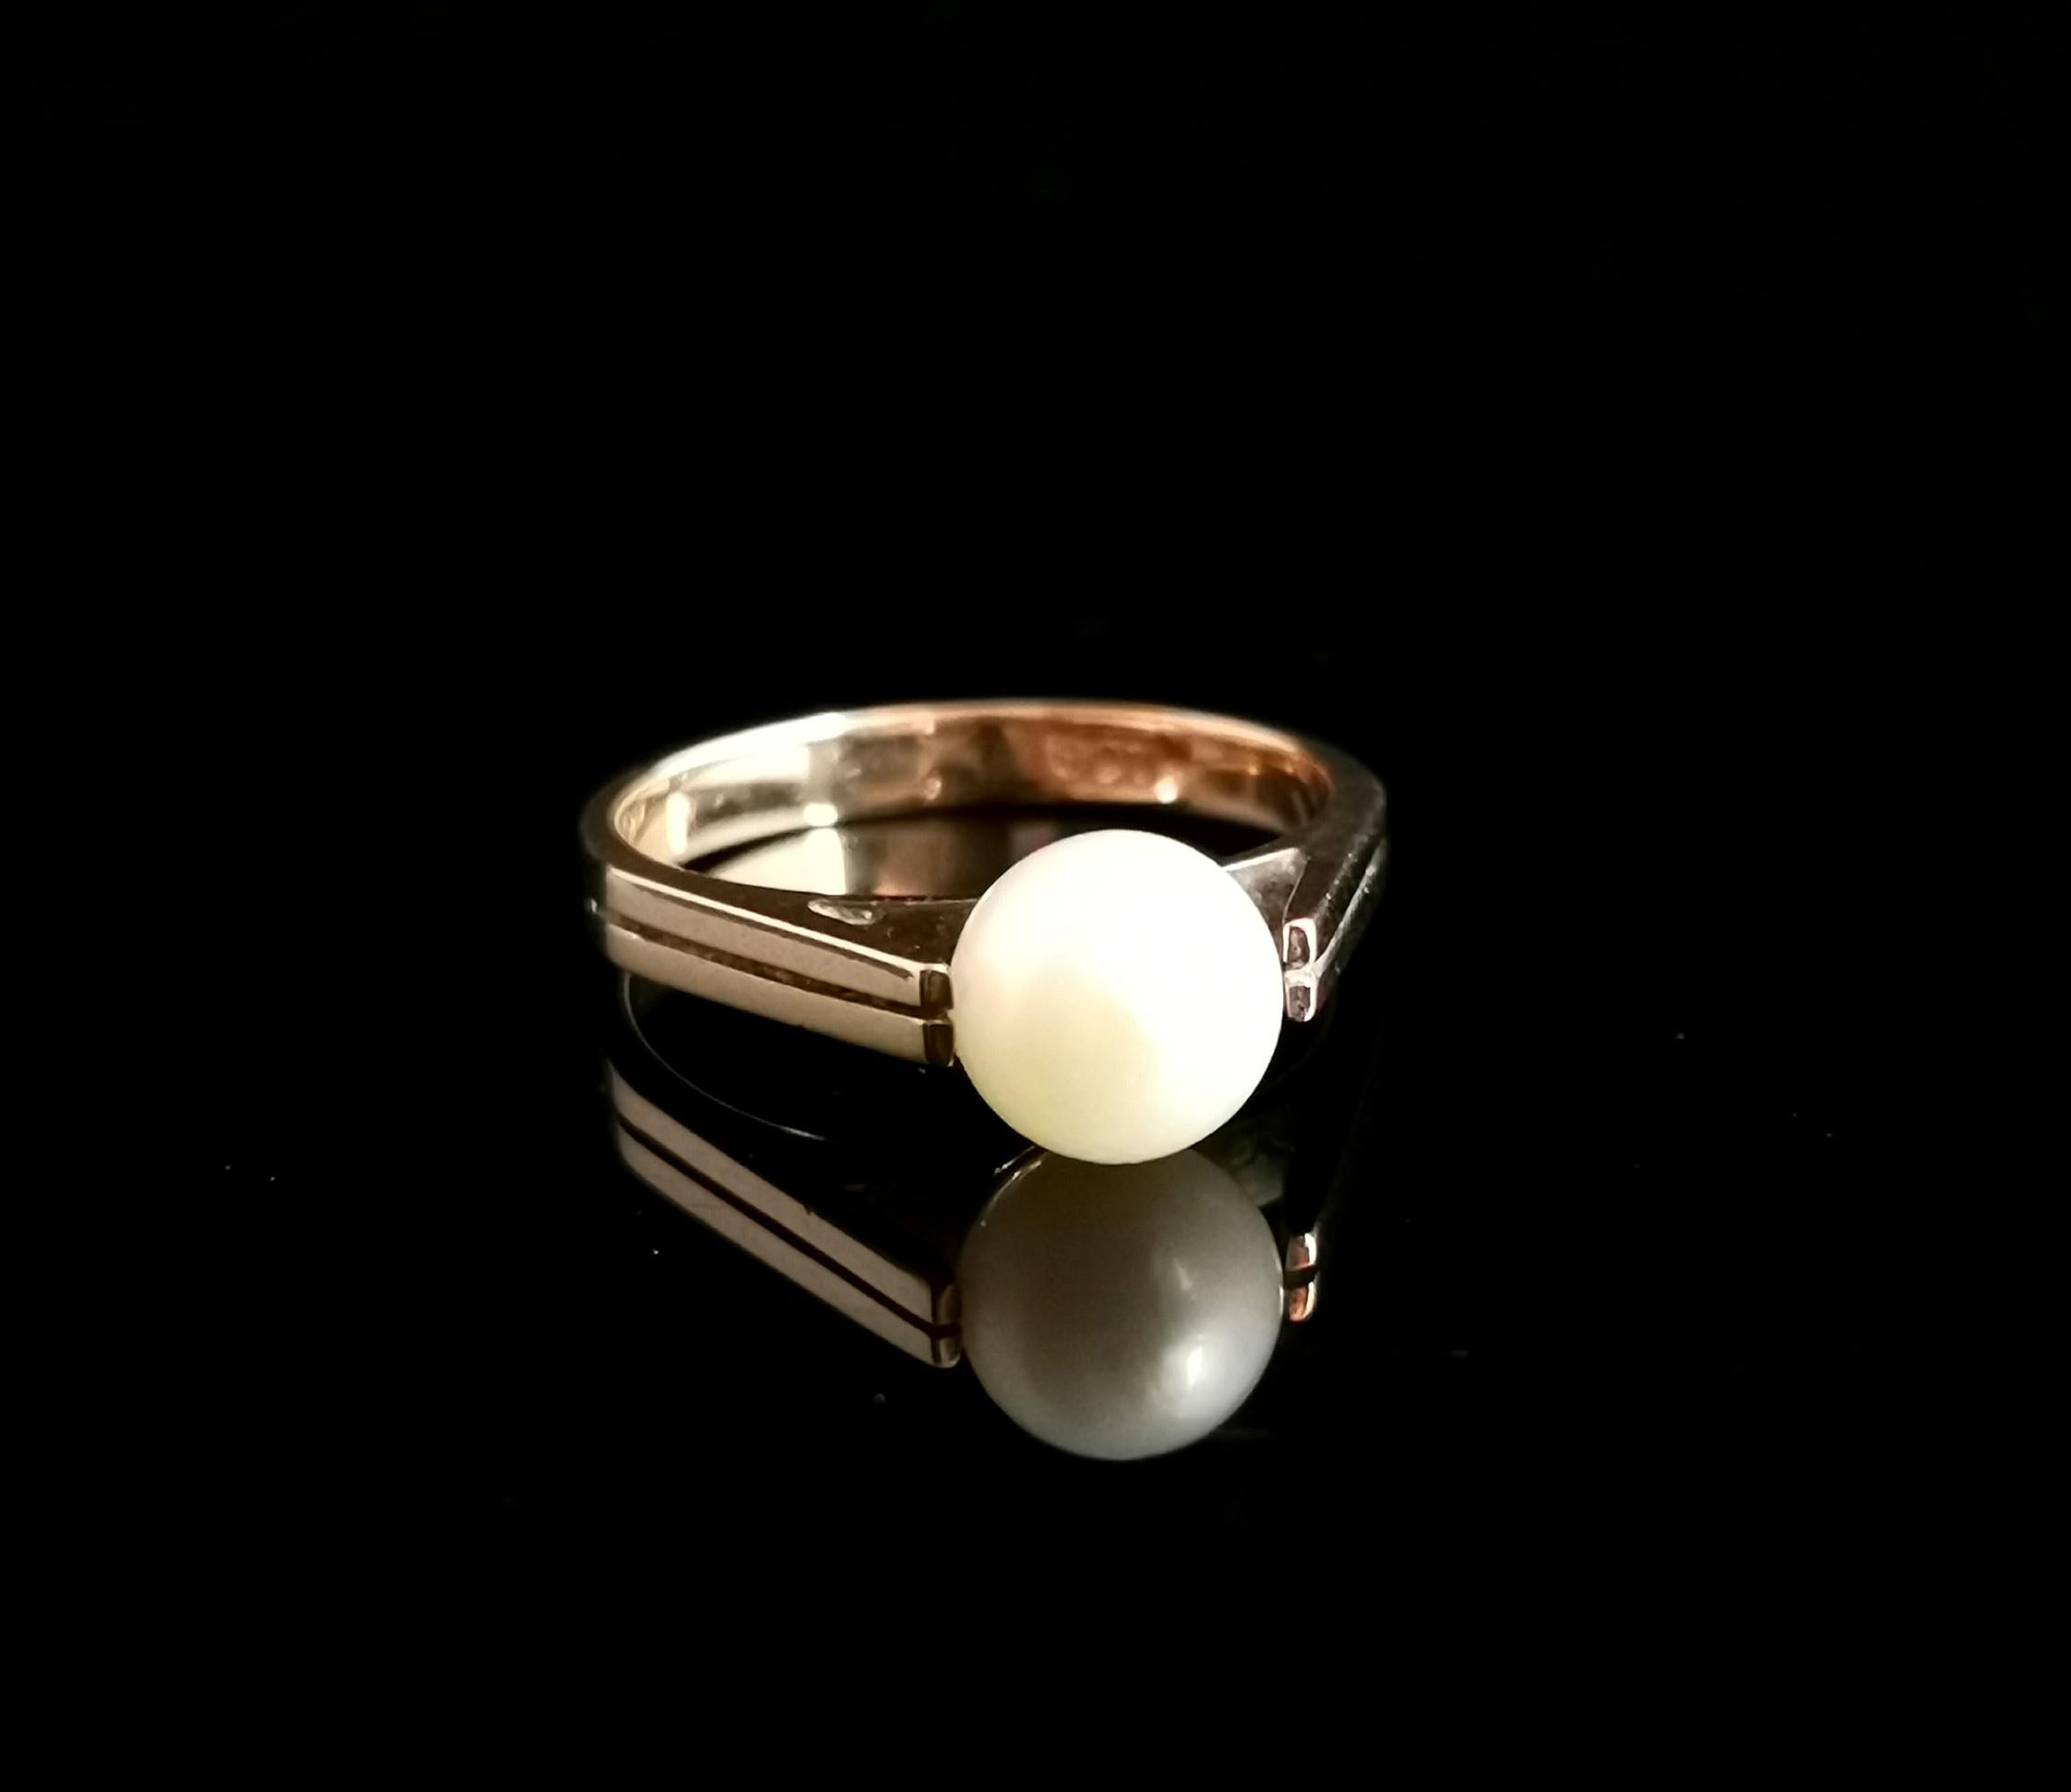 Women's Vintage c1940s Pearl Solitaire Ring, 9 Karat Yellow Gold